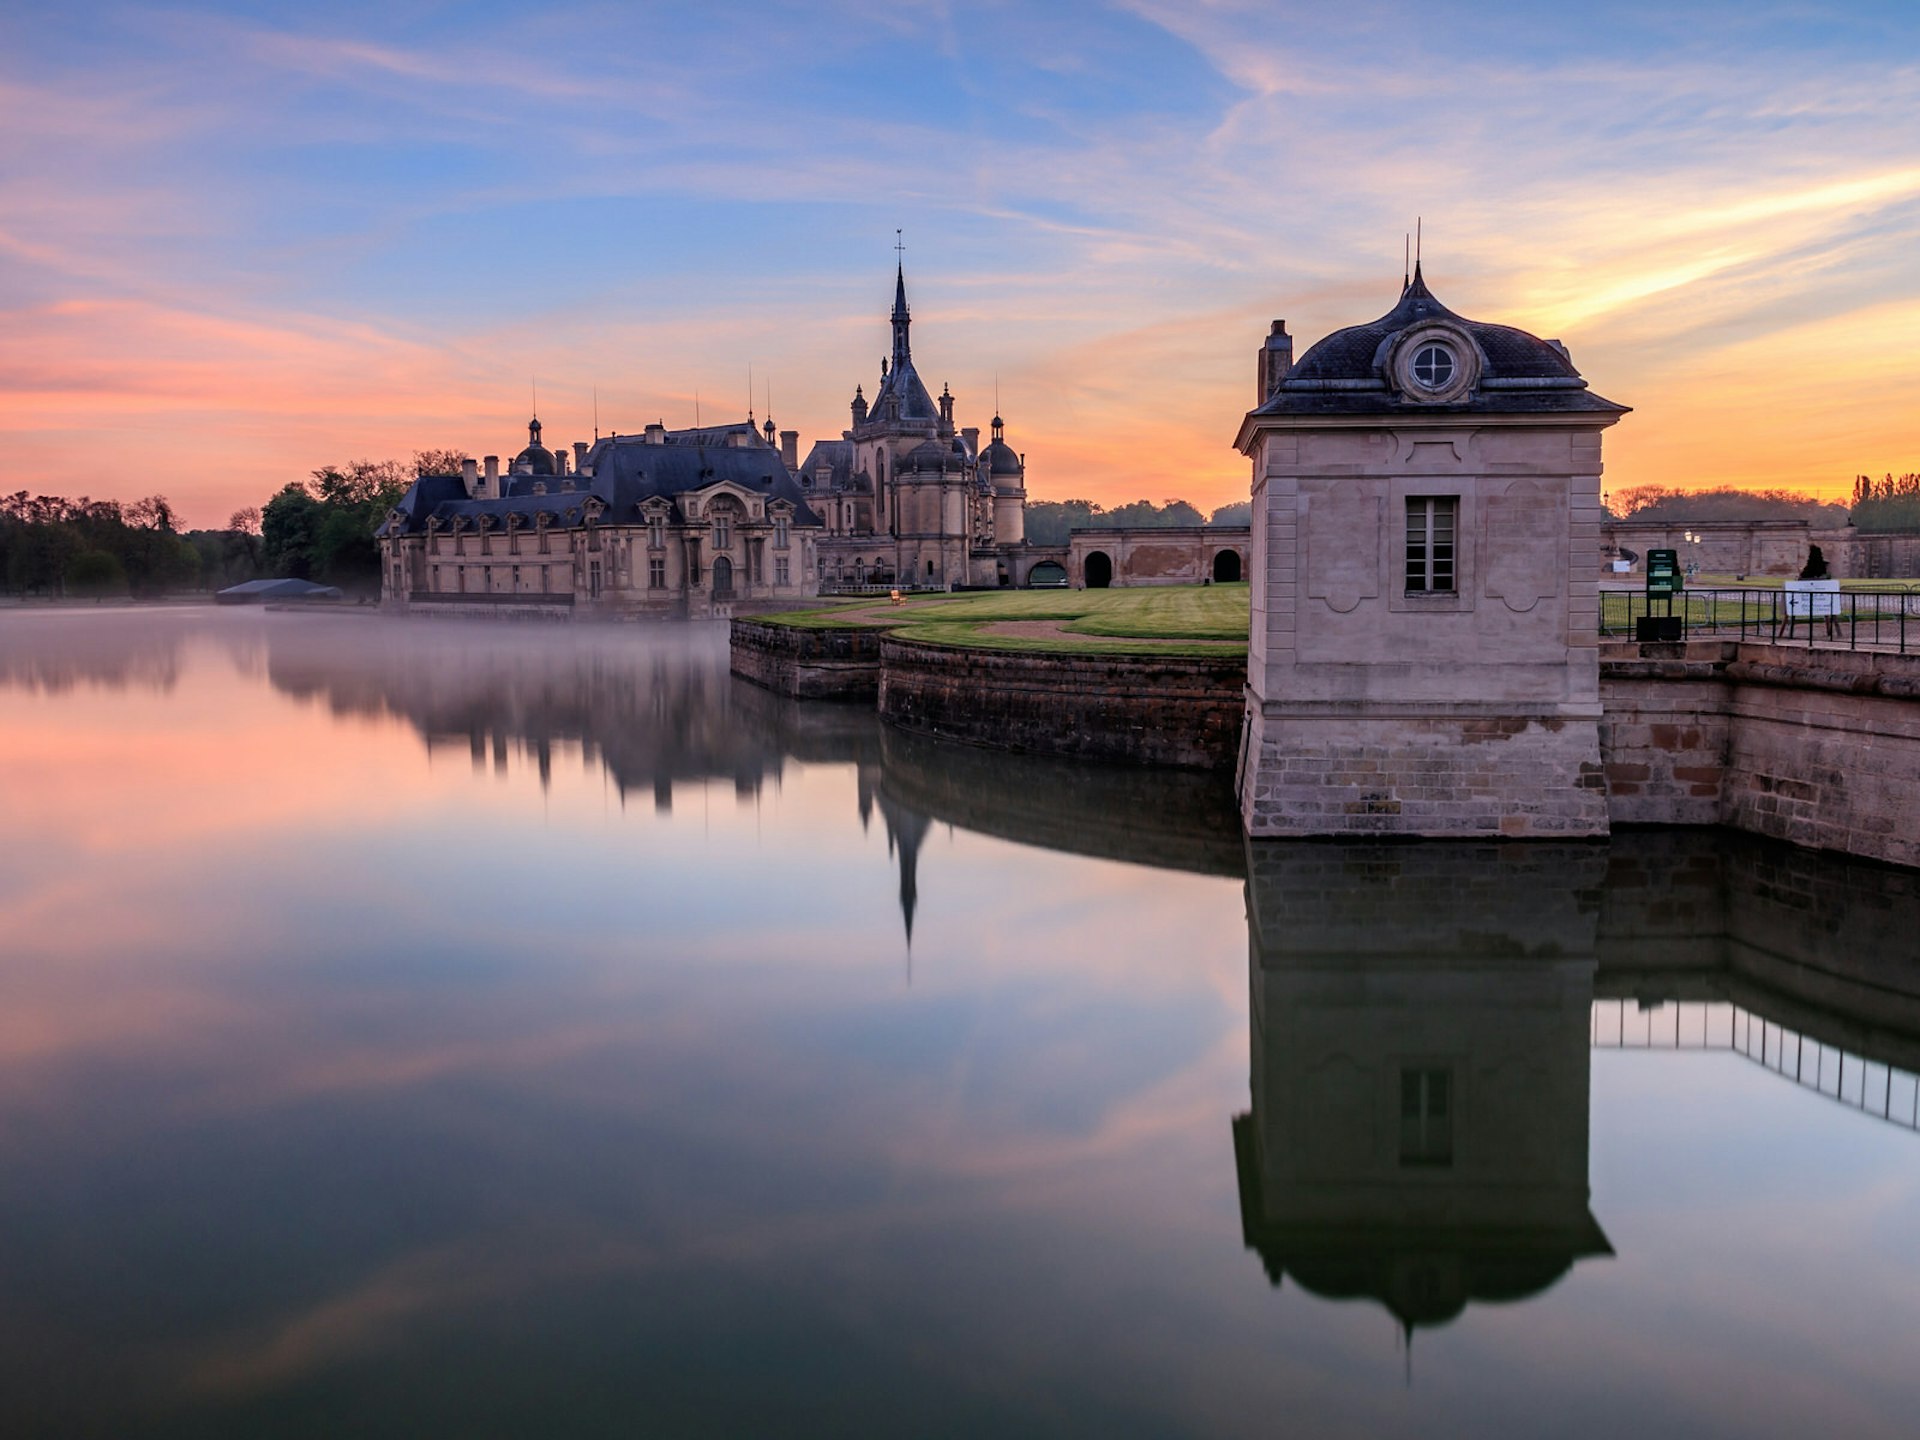 The Château de Chantilly: a large mansion rising from an artificial lake, photographed here at dawn.